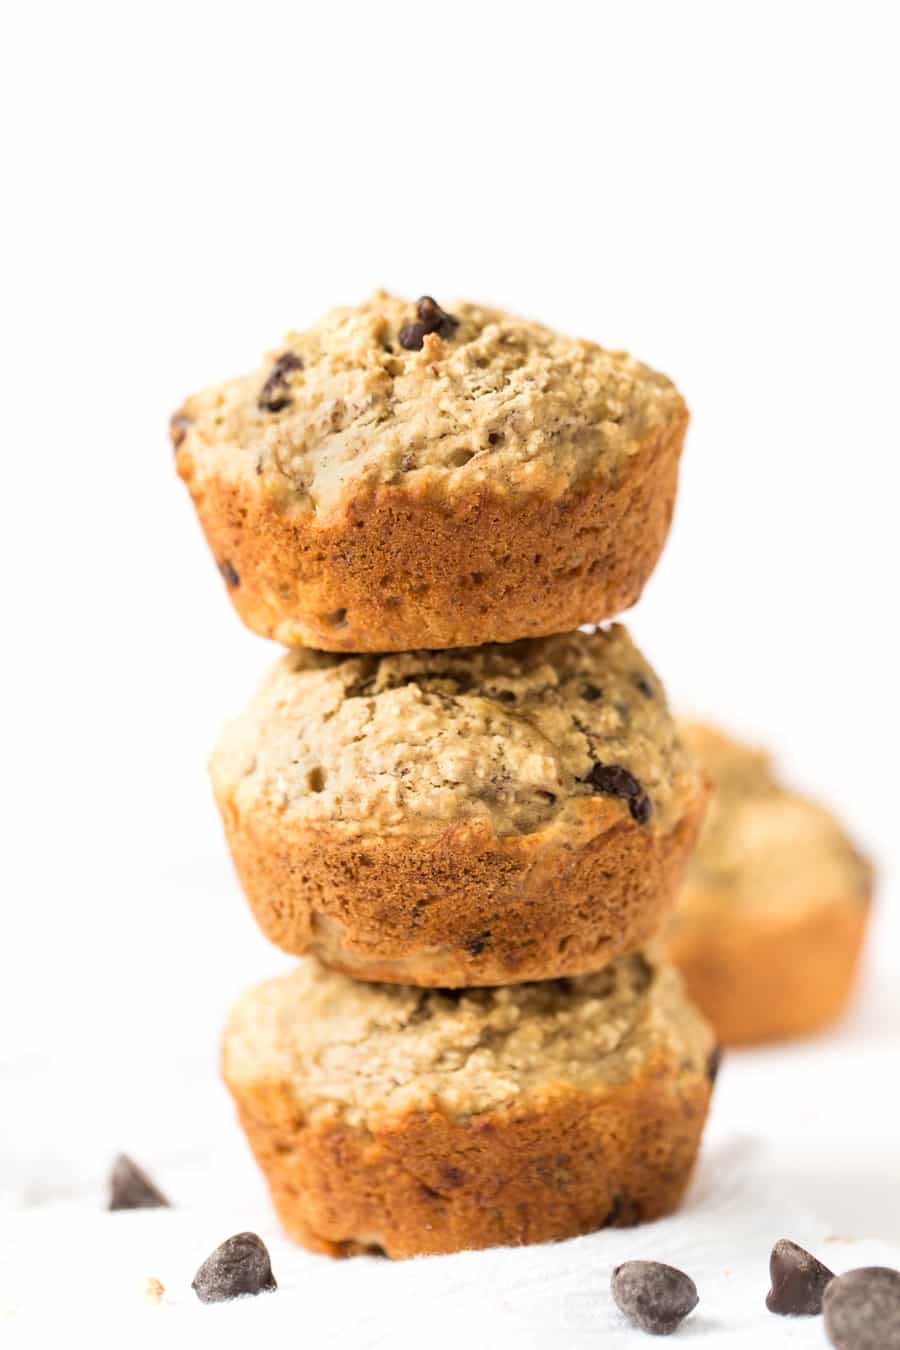 These SKINNY Banana Chocolate Chip Quinoa Muffins are made with wholesome ingredients, sweetened naturally and taste AMAZING!